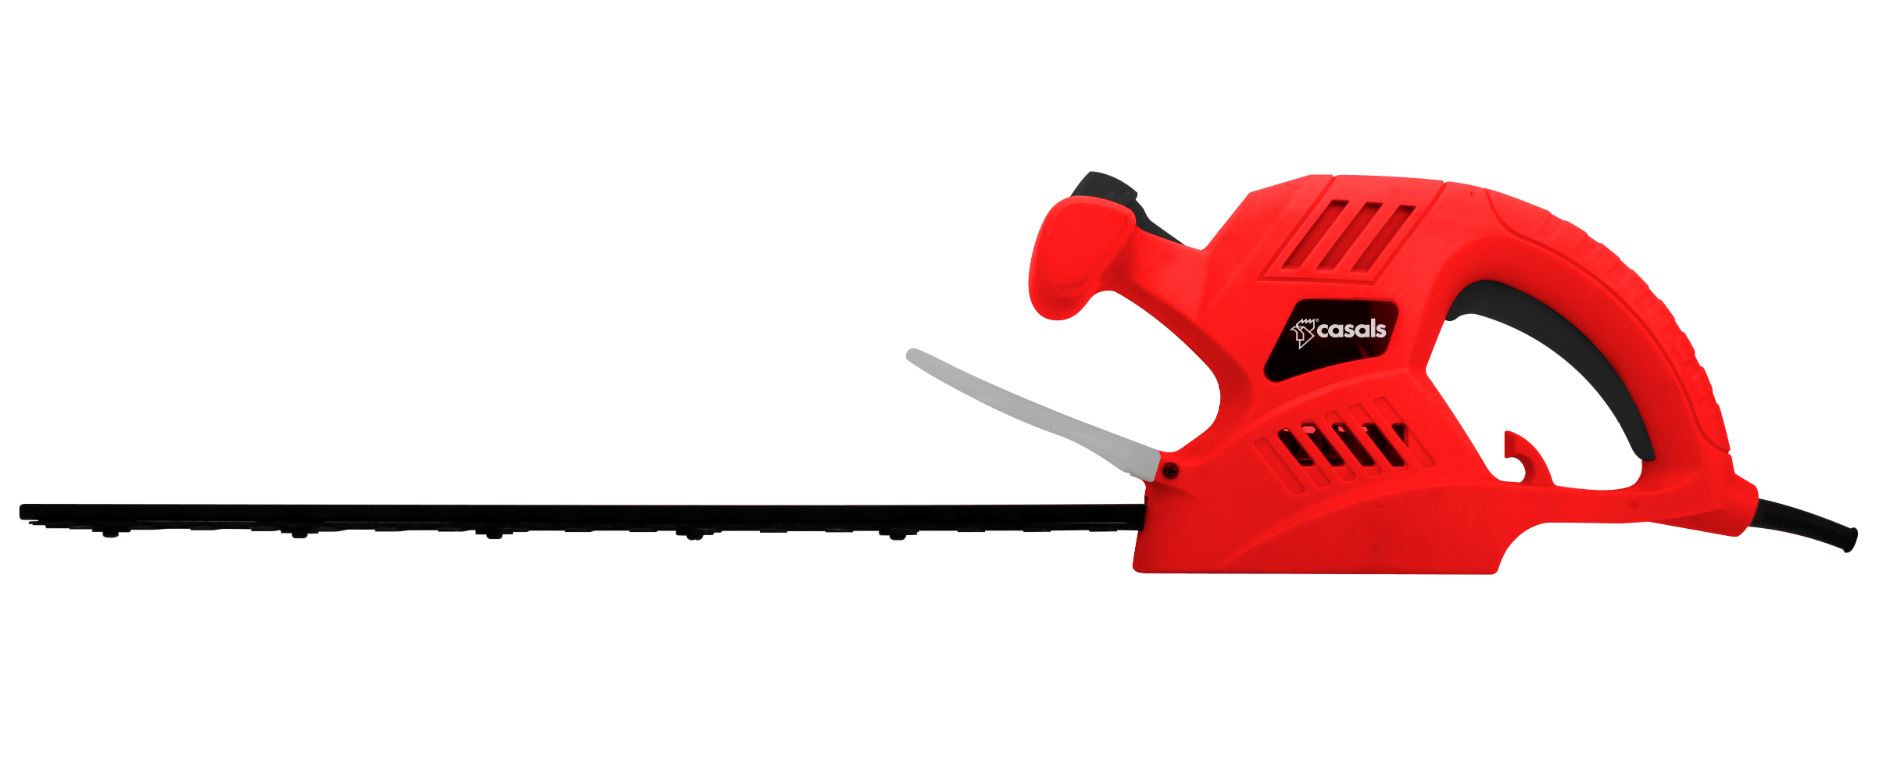 Casals Hedge Trimmer Electric Plastic Red 510mm 450W